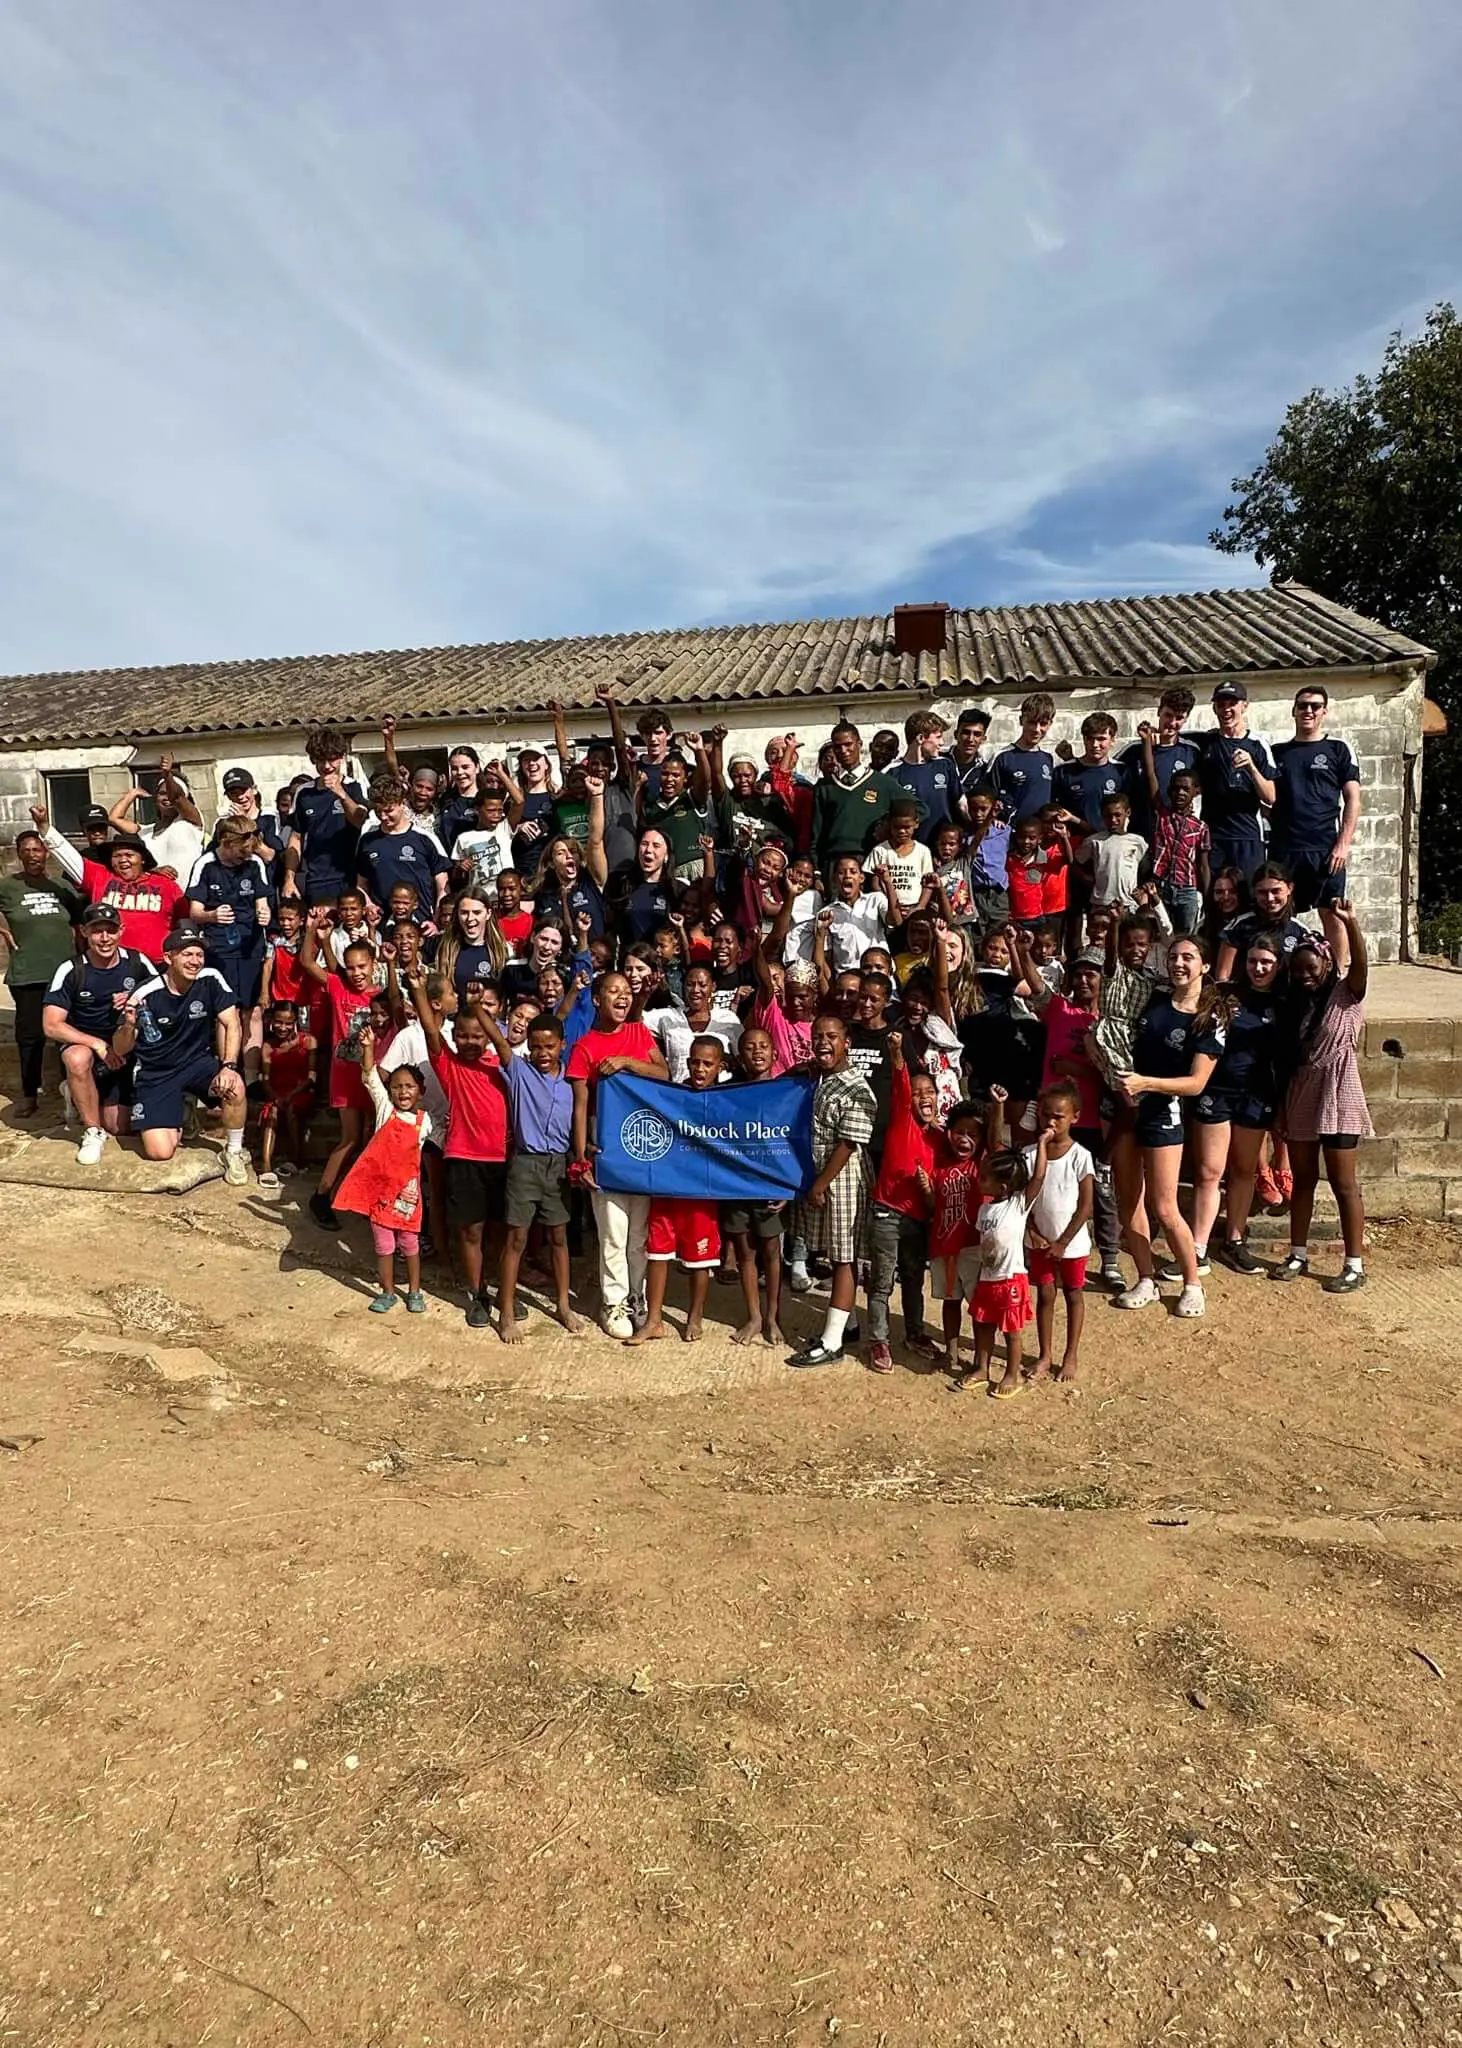 Ibstock Place School pupils had an amazing trip to sunny South Africa over half term, playing matches against local schools.